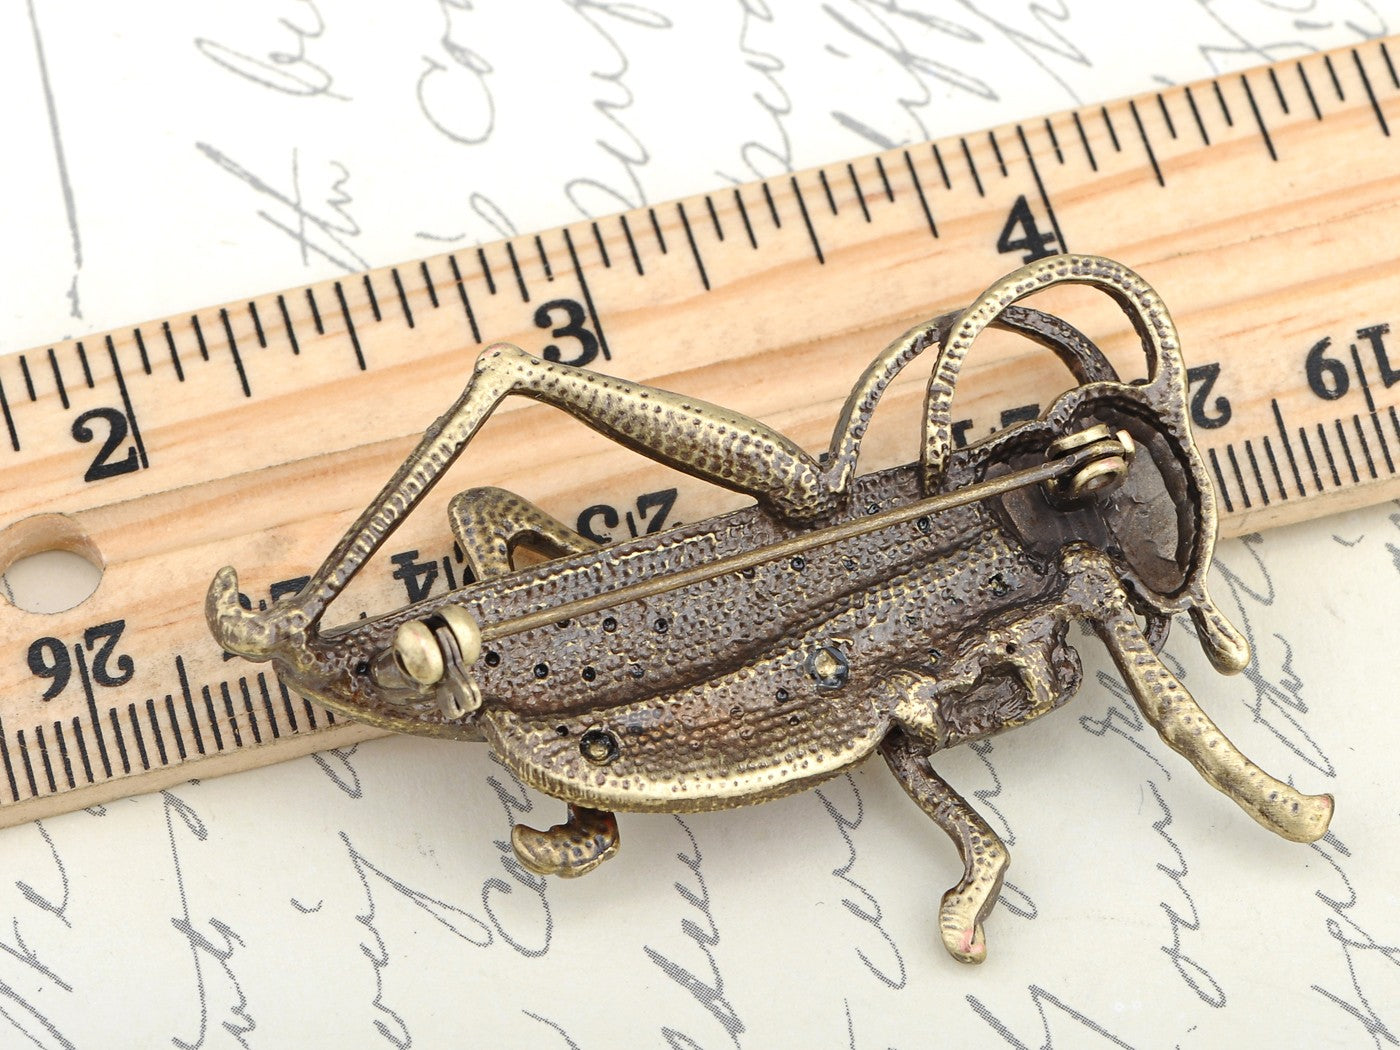 Antique Red Grasshopper Cricket Insect Brooch Pin